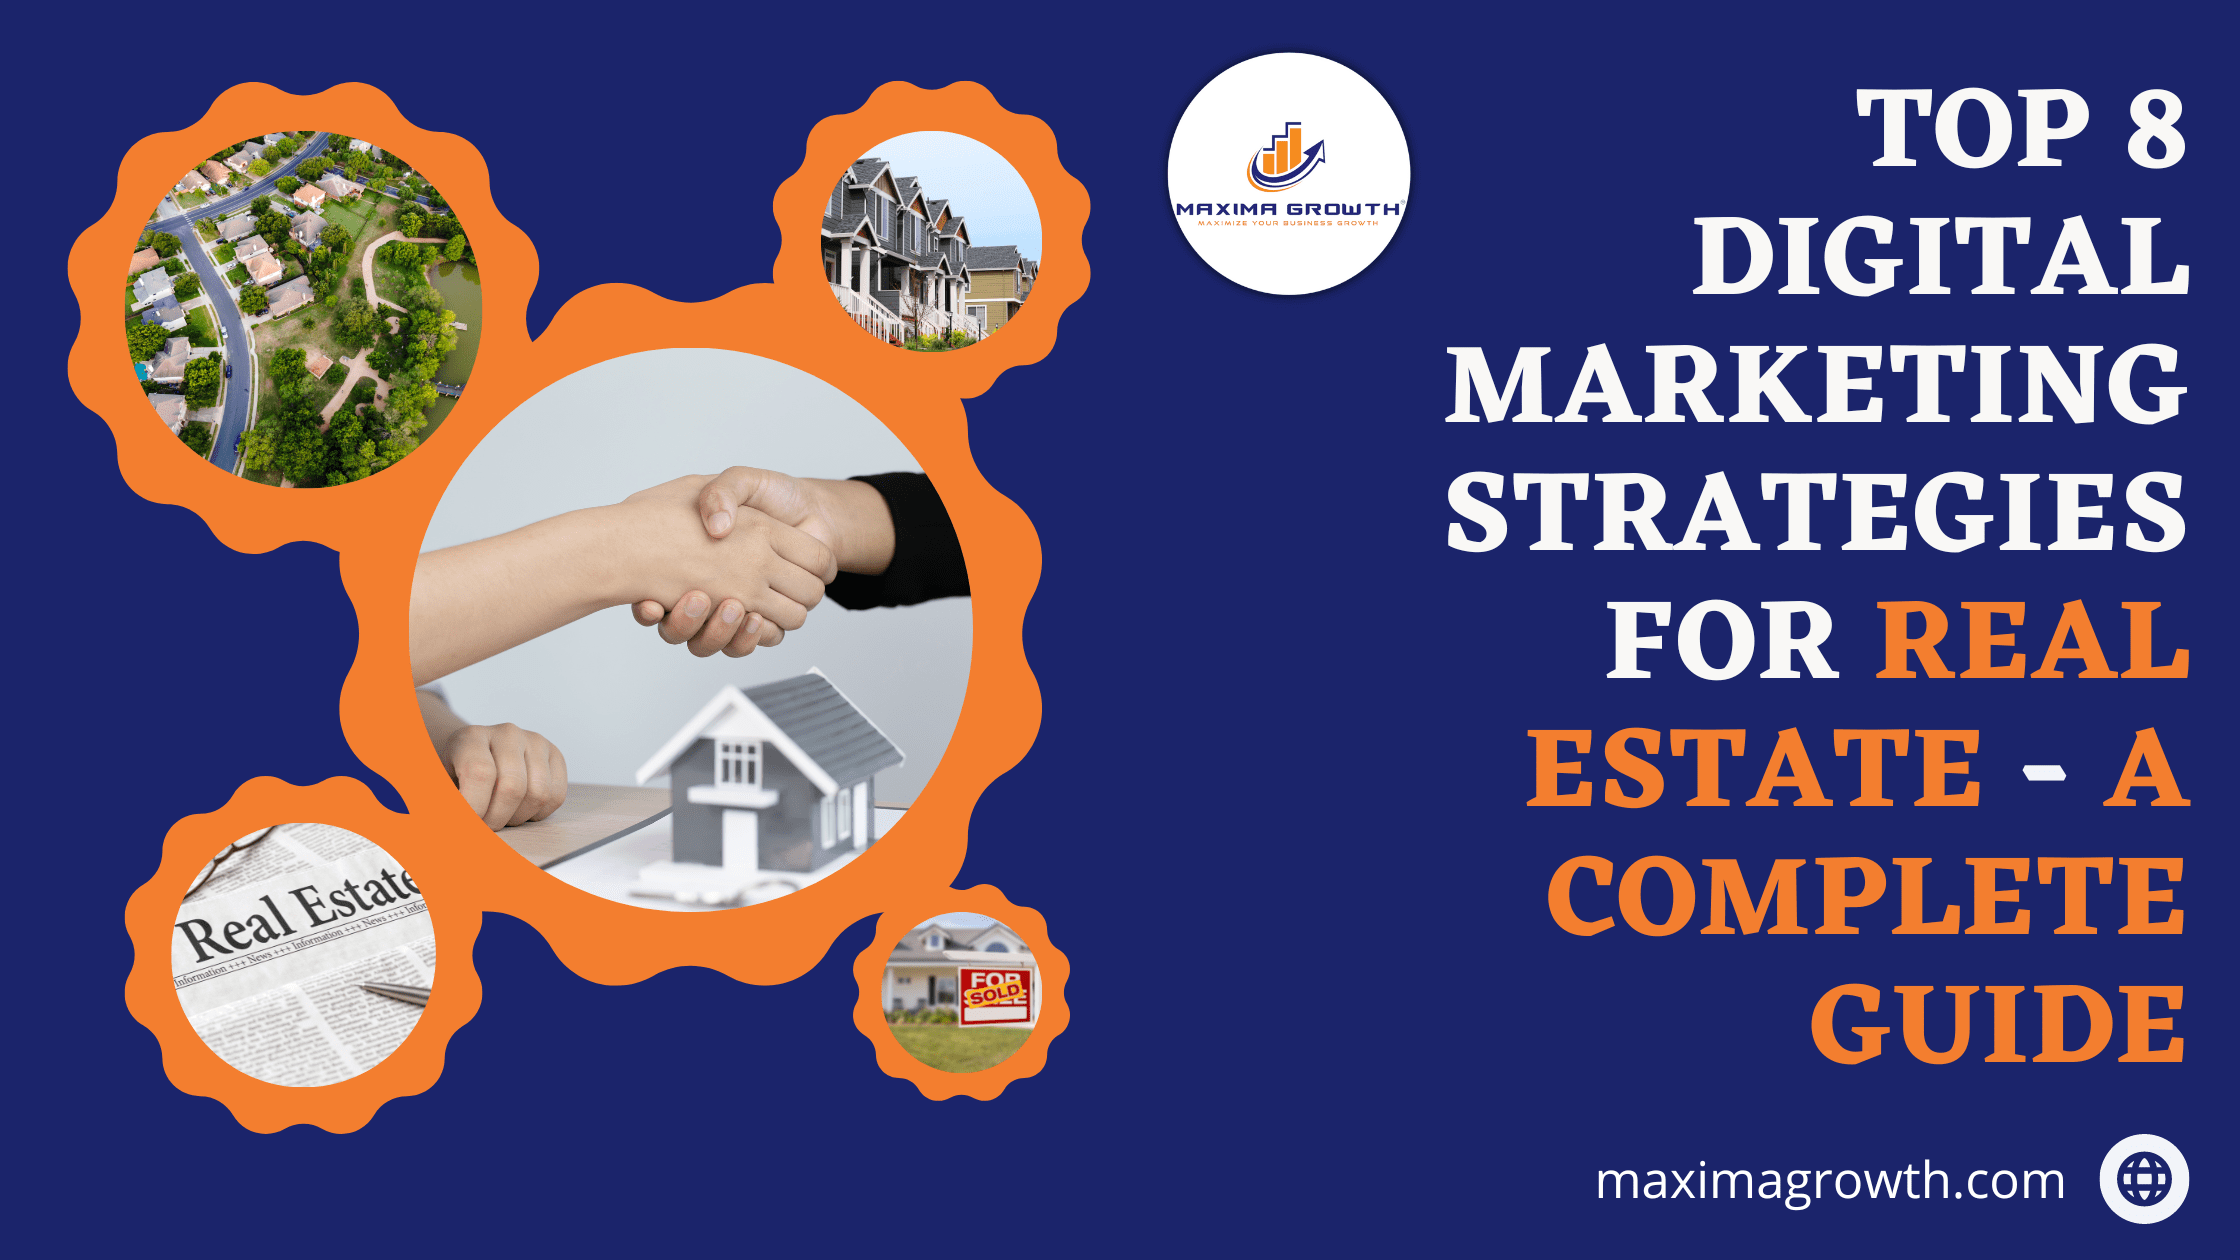 Top 8 Digital Marketing Strategies for Real Estate – A Complete Guide